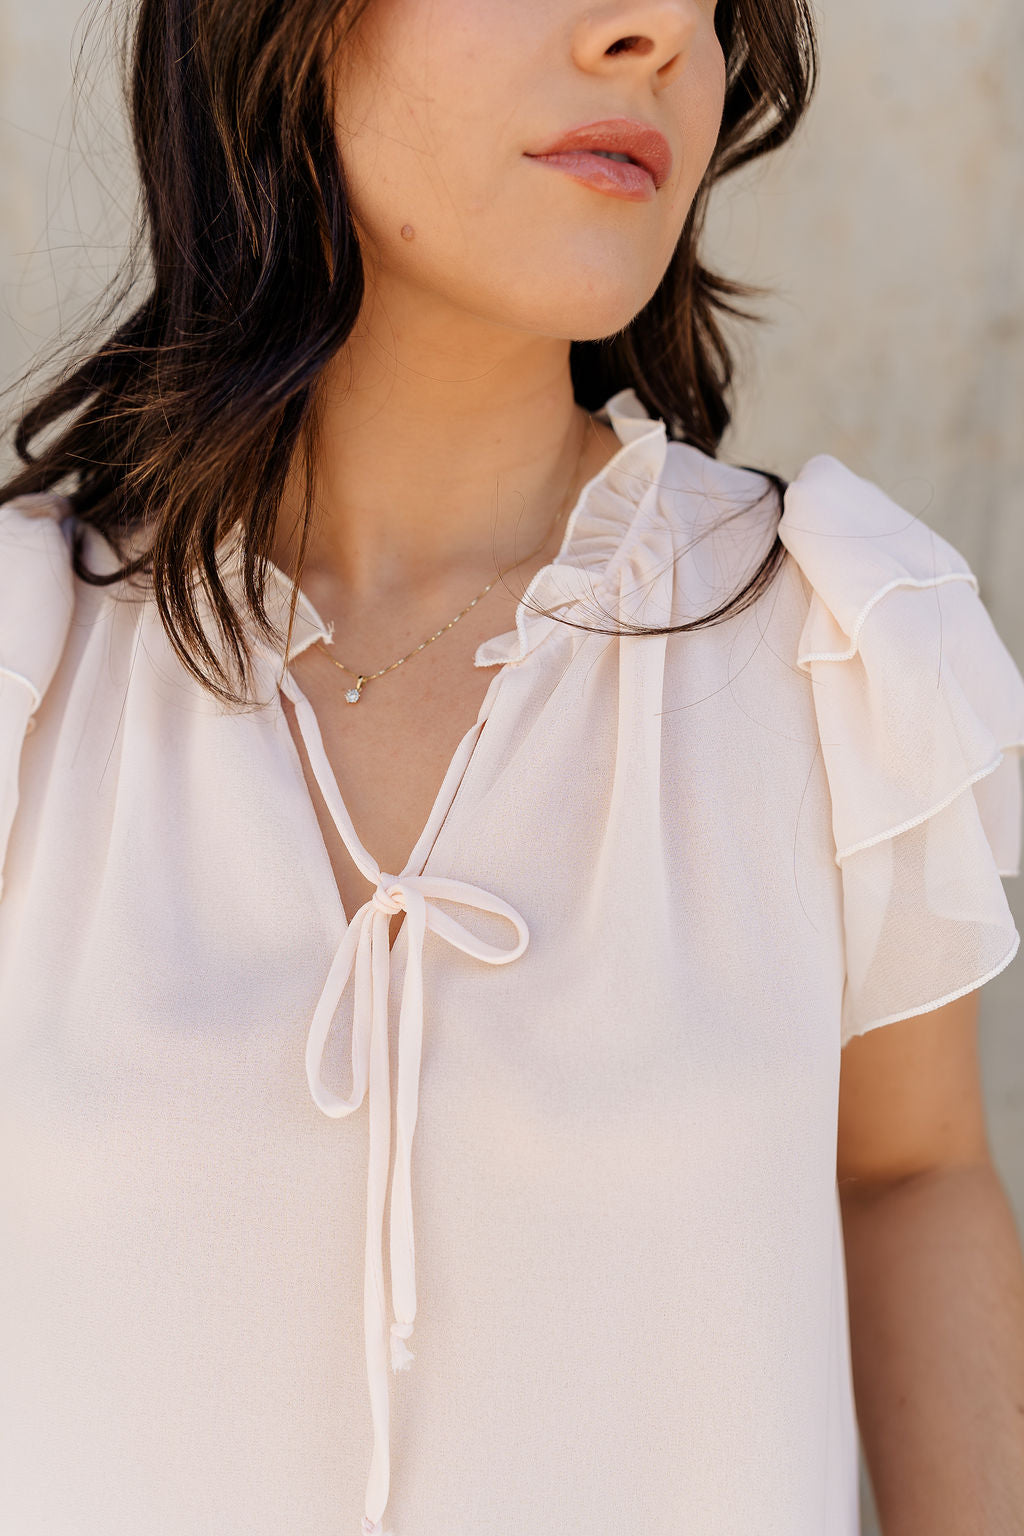 Close up view of model wearing the Olivia Cream Ruffle Short Sleeve Top which features cream sheer fabic, cream lining, ruffle neckline with drawstring ties, and ruffle tiered short sleeves.